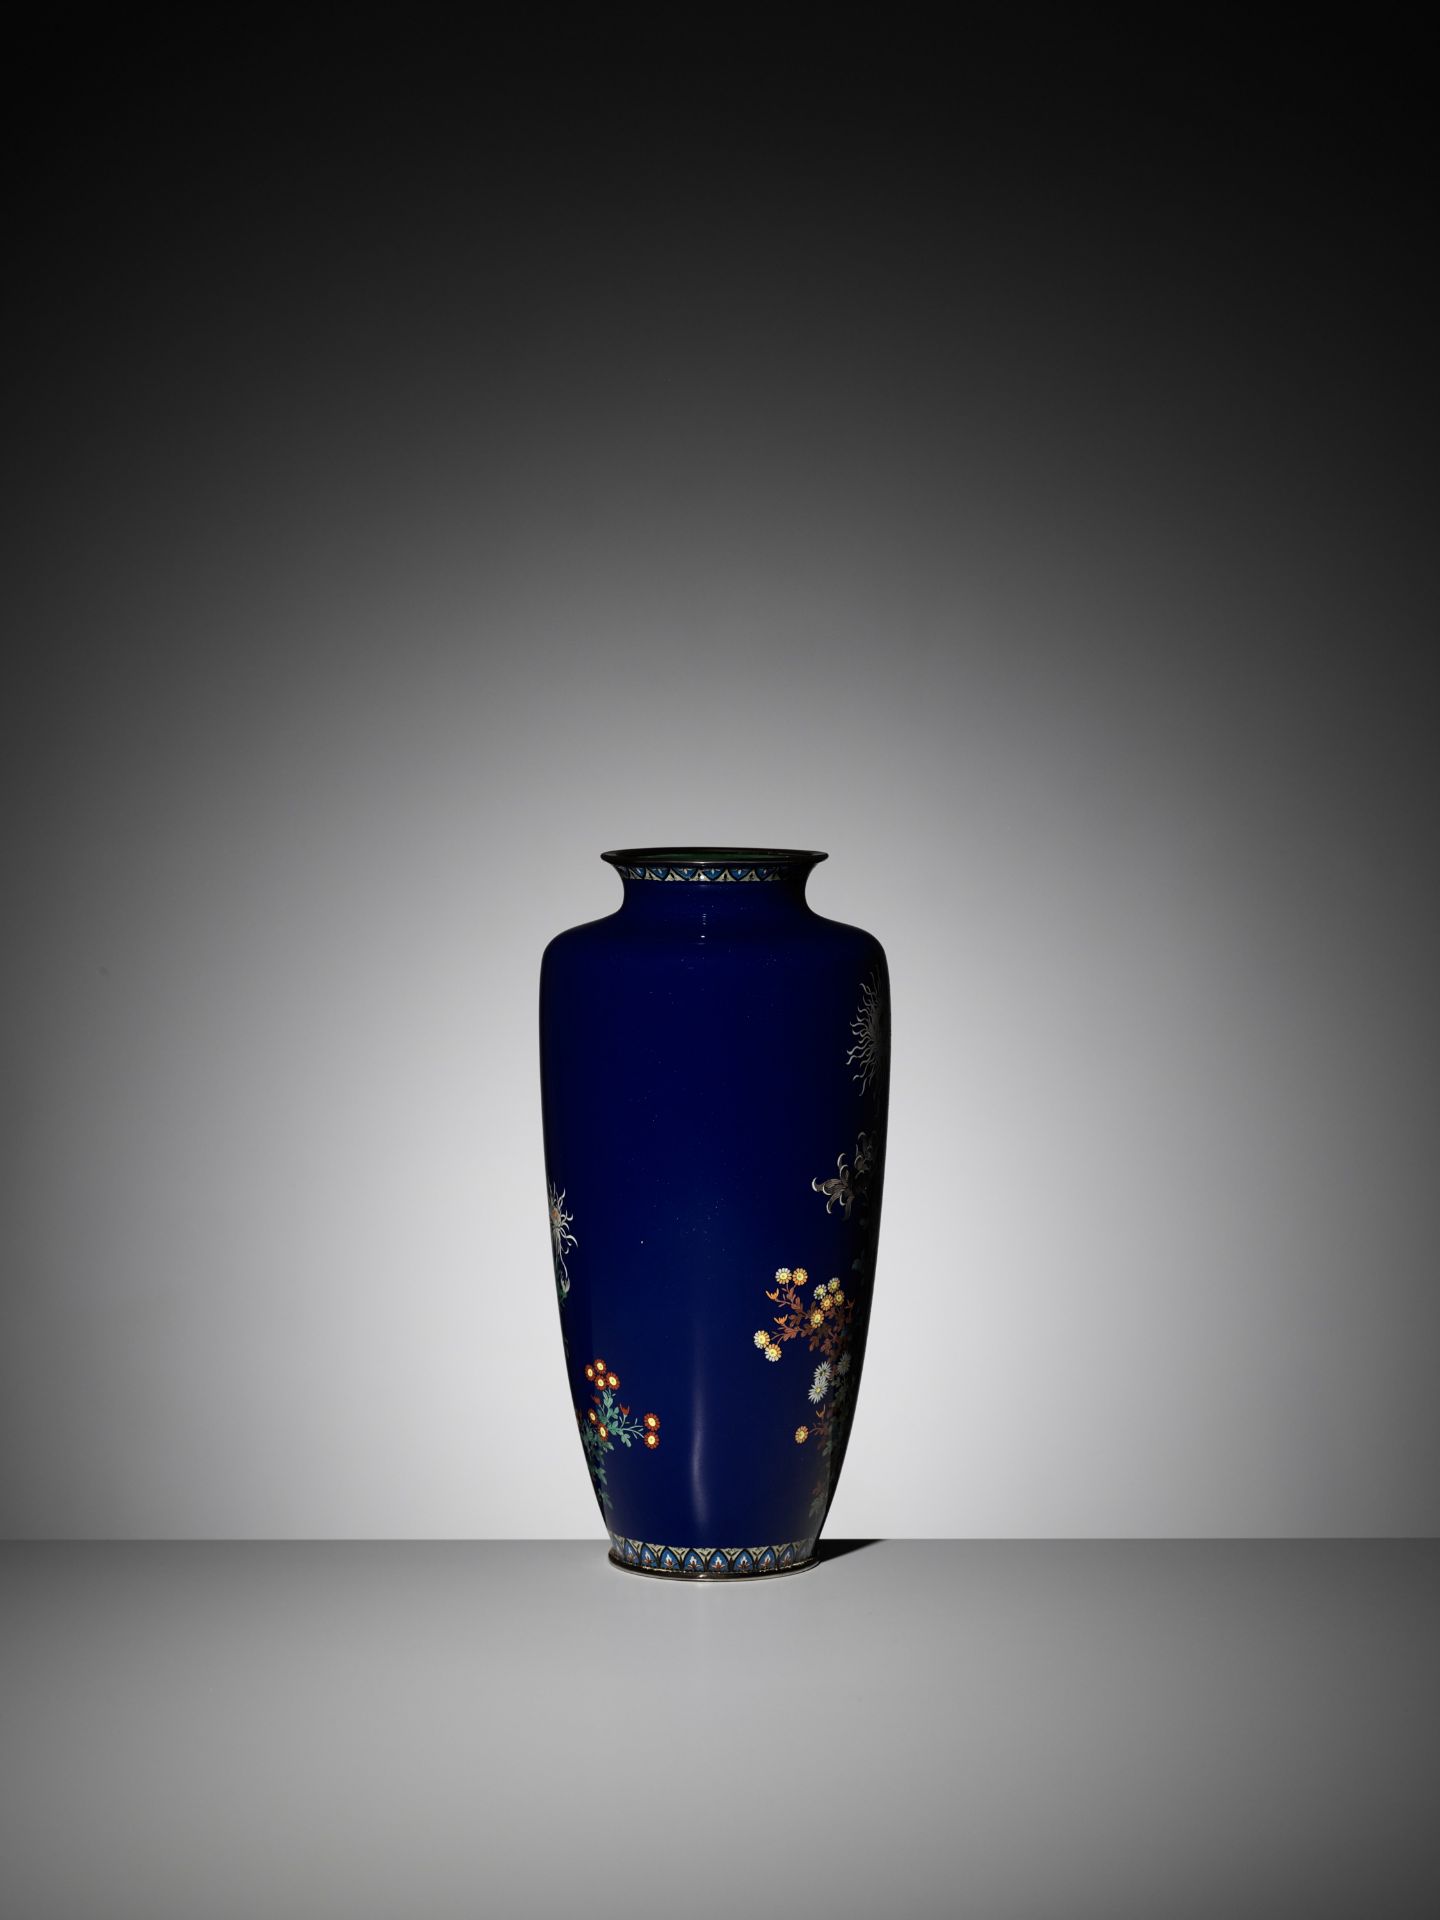 A LARGE MIDNIGHT-BLUE CLOISONNÃ‰ VASE WITH FLOWERS - Image 6 of 10